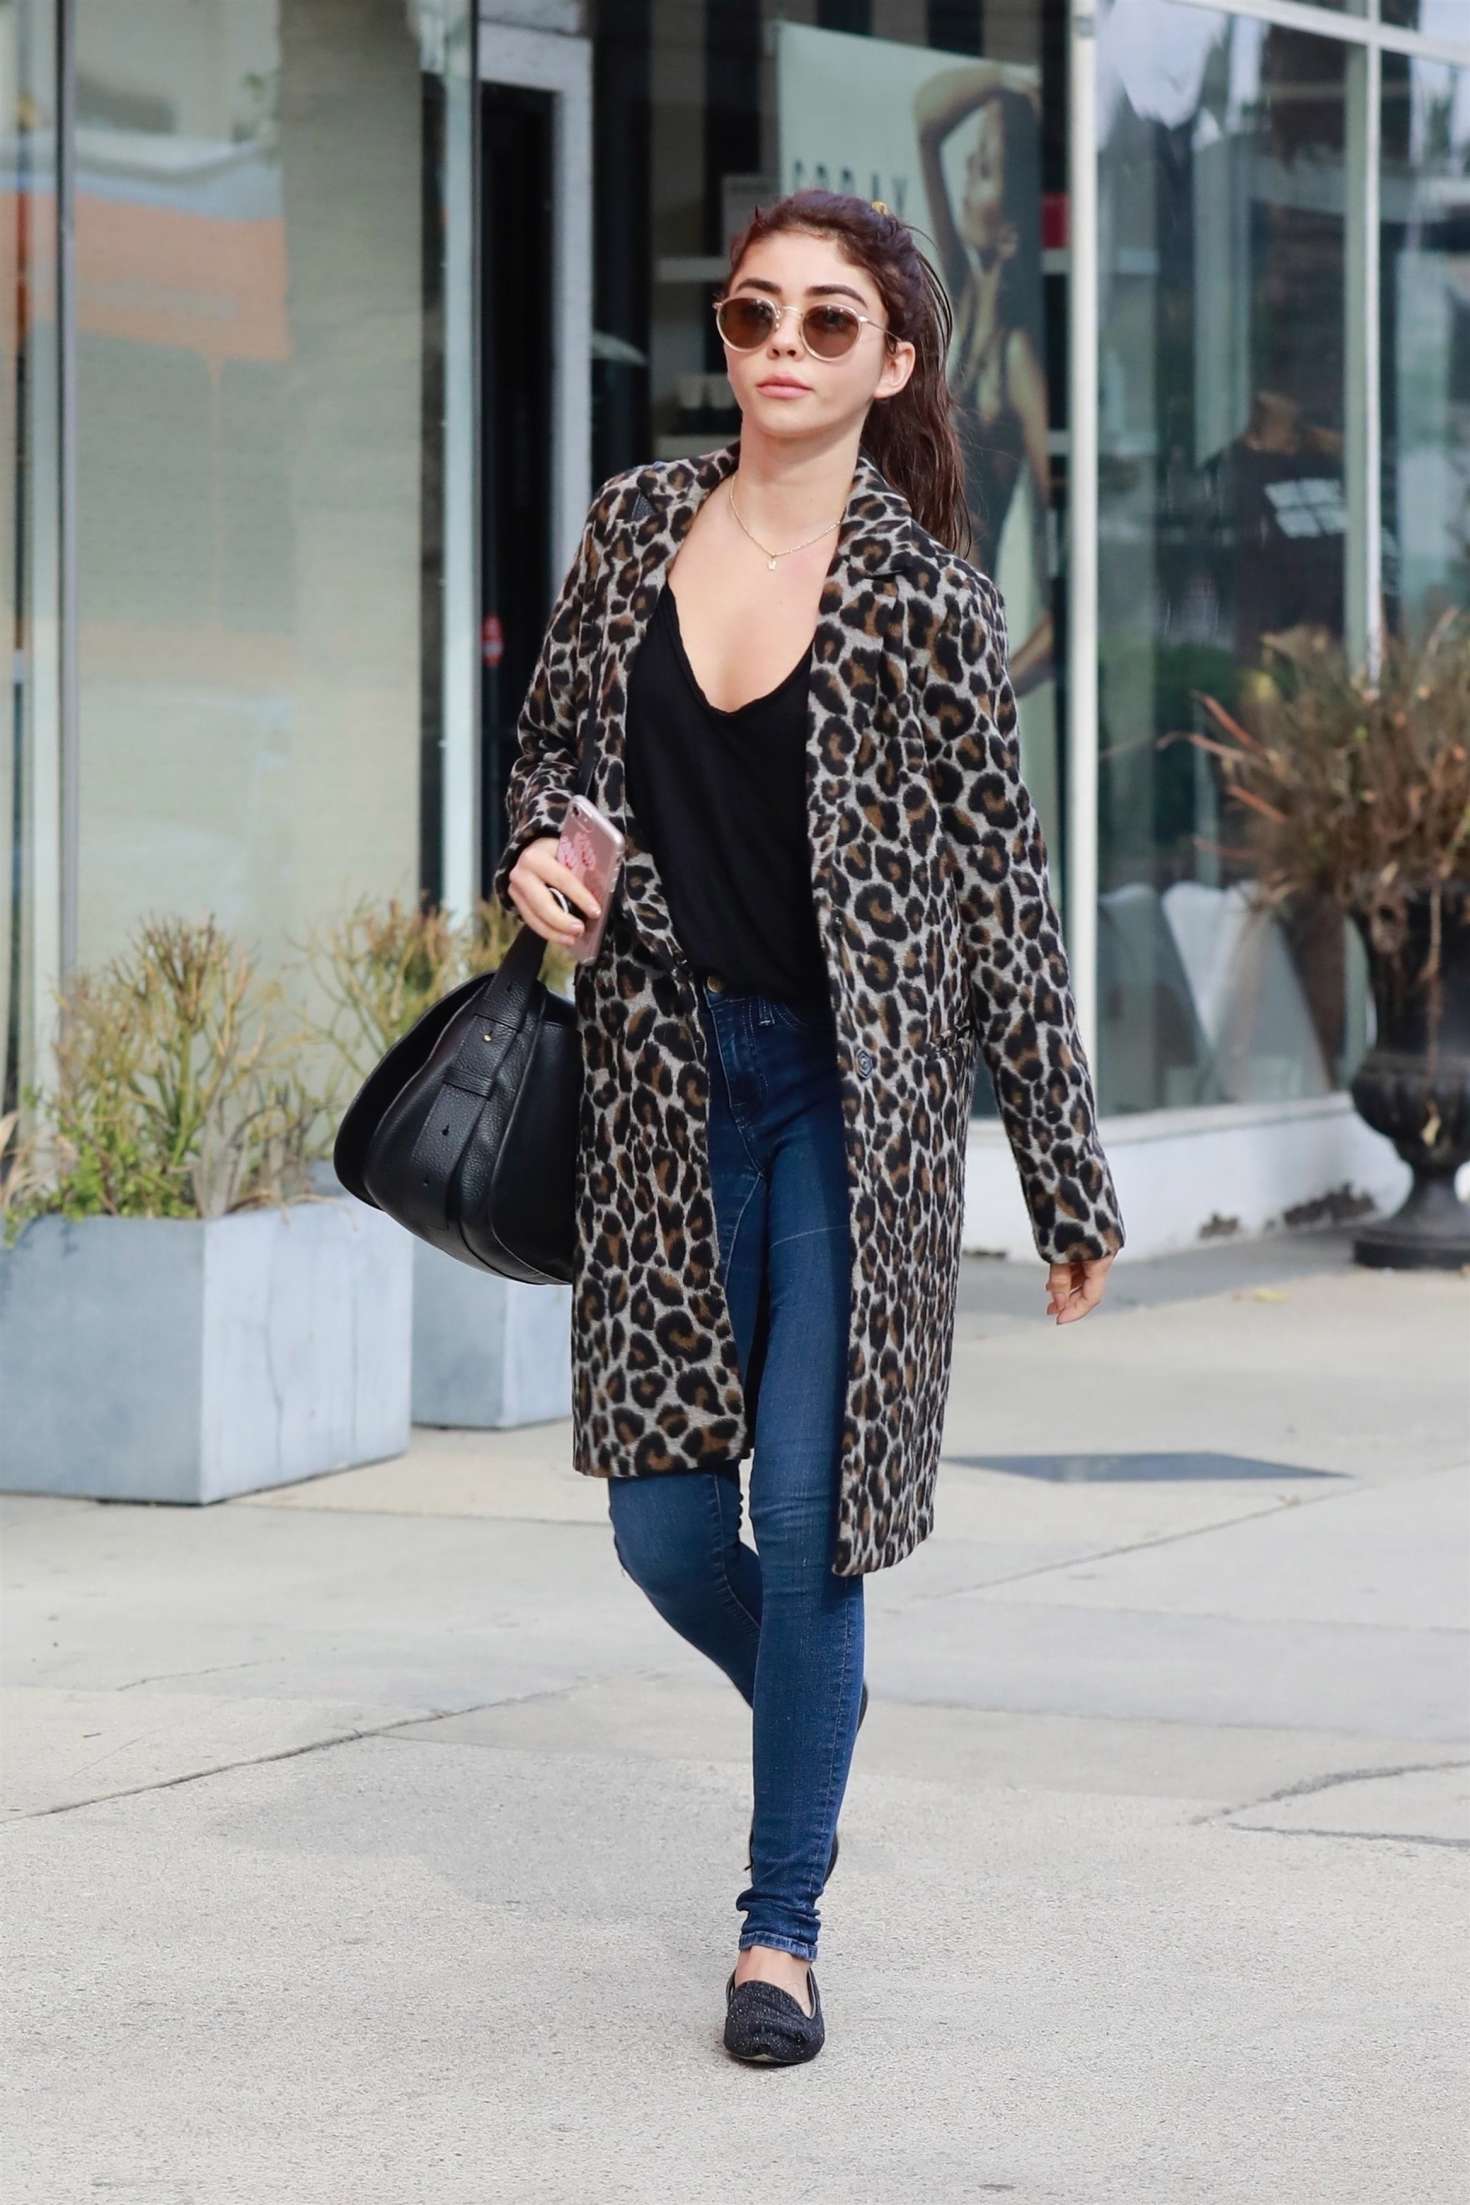 Sarah Hyland in Animal Print Coat â€“ Out in Los Angeles